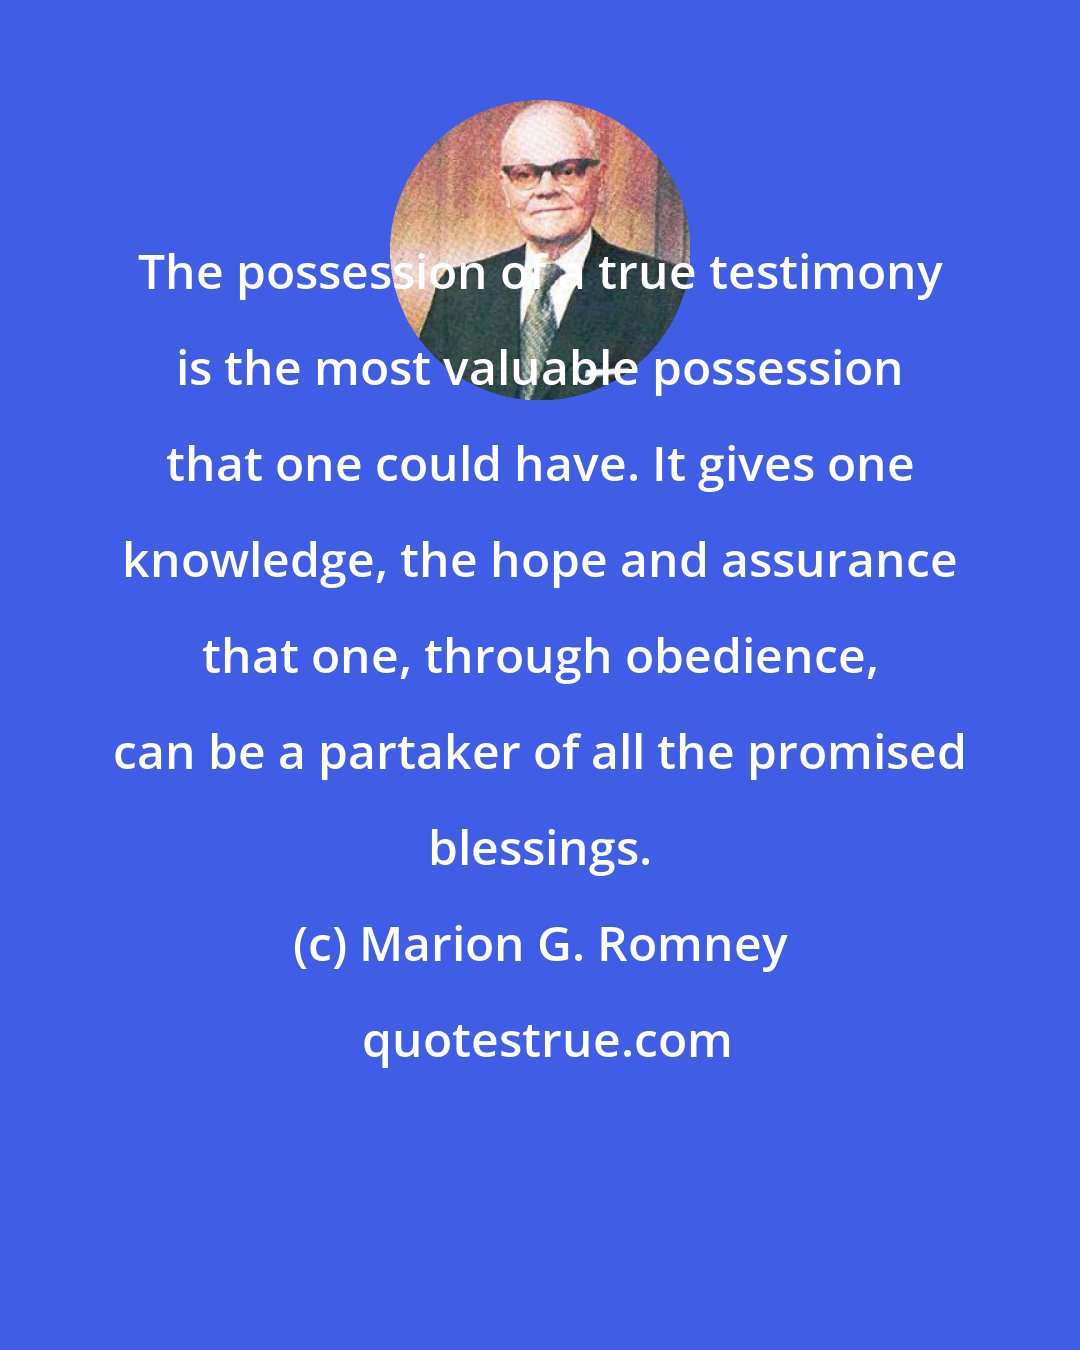 Marion G. Romney: The possession of a true testimony is the most valuable possession that one could have. It gives one knowledge, the hope and assurance that one, through obedience, can be a partaker of all the promised blessings.